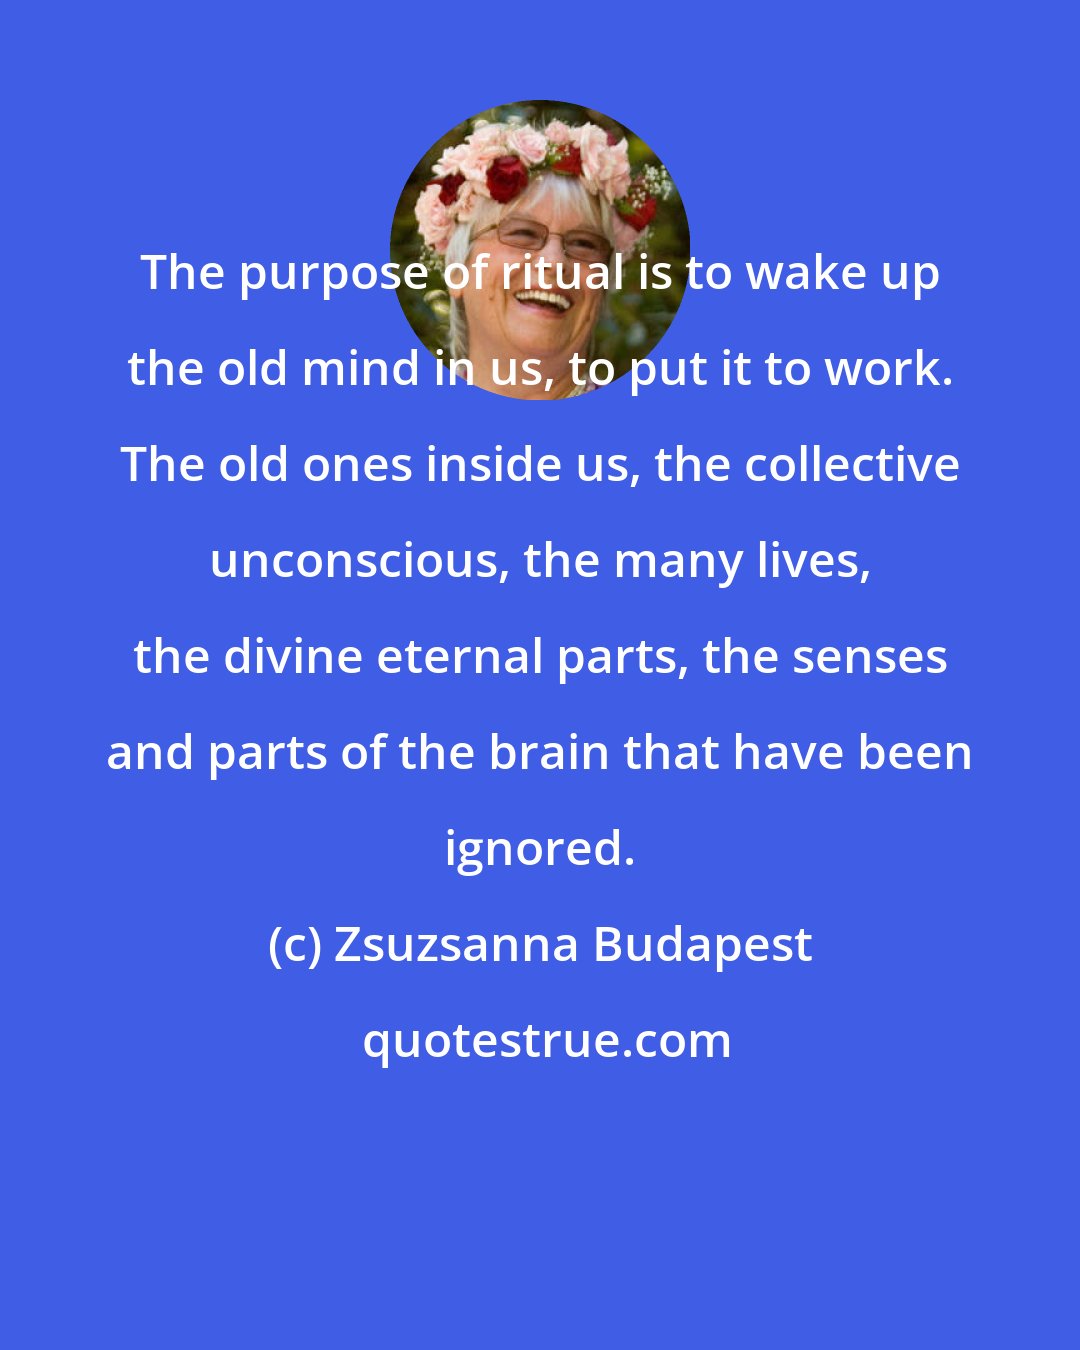 Zsuzsanna Budapest: The purpose of ritual is to wake up the old mind in us, to put it to work. The old ones inside us, the collective unconscious, the many lives, the divine eternal parts, the senses and parts of the brain that have been ignored.